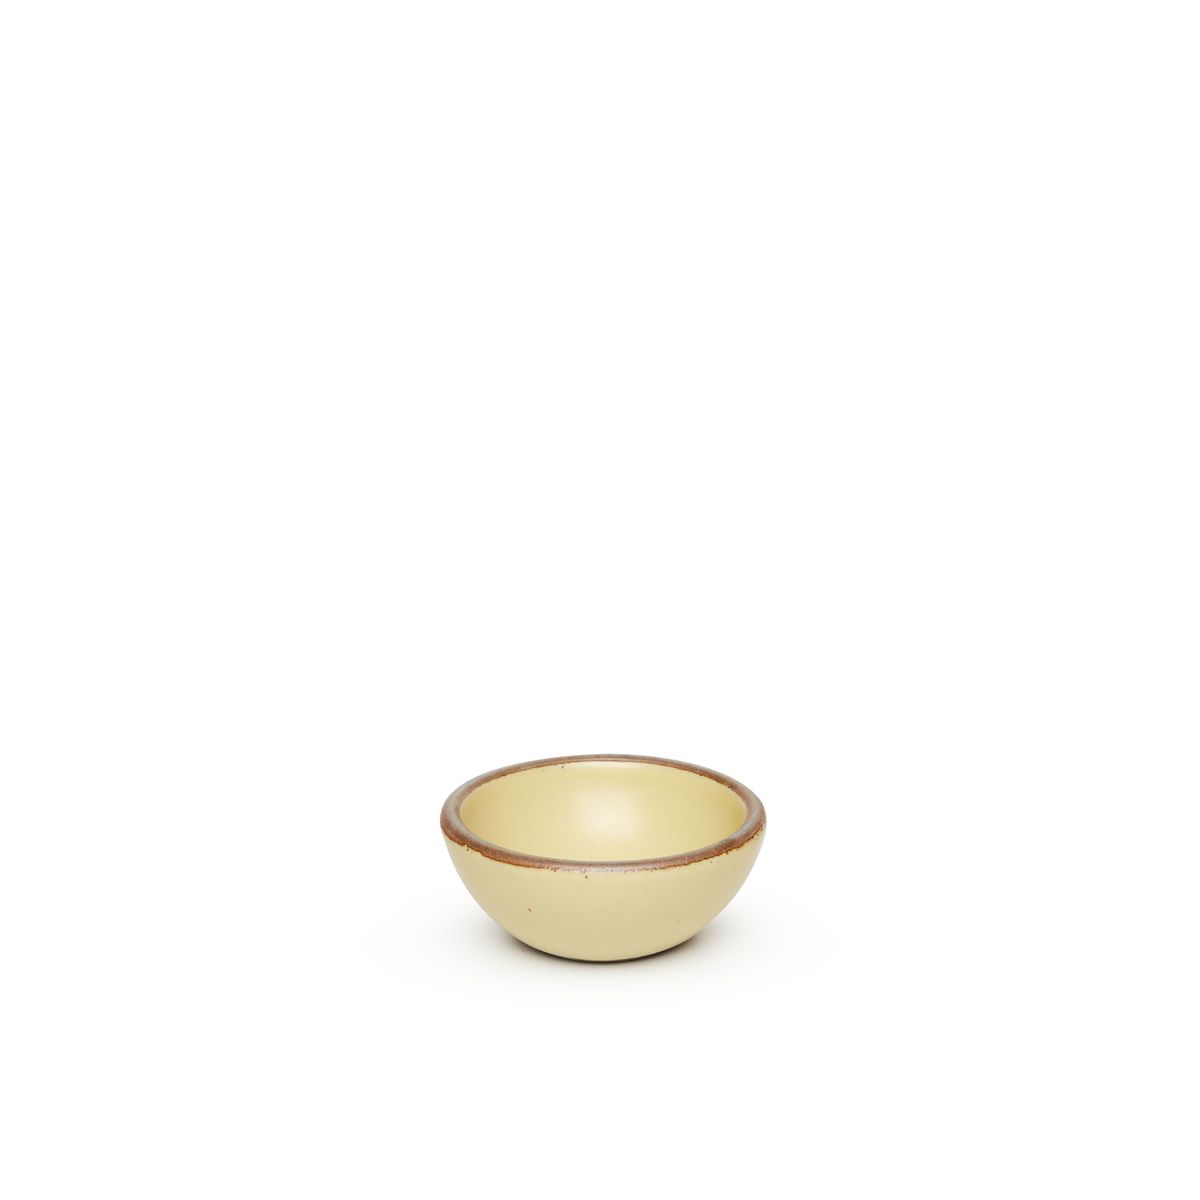 A tiny rounded ceramic bowl in a light butter yellow color featuring iron speckles and an unglazed rim